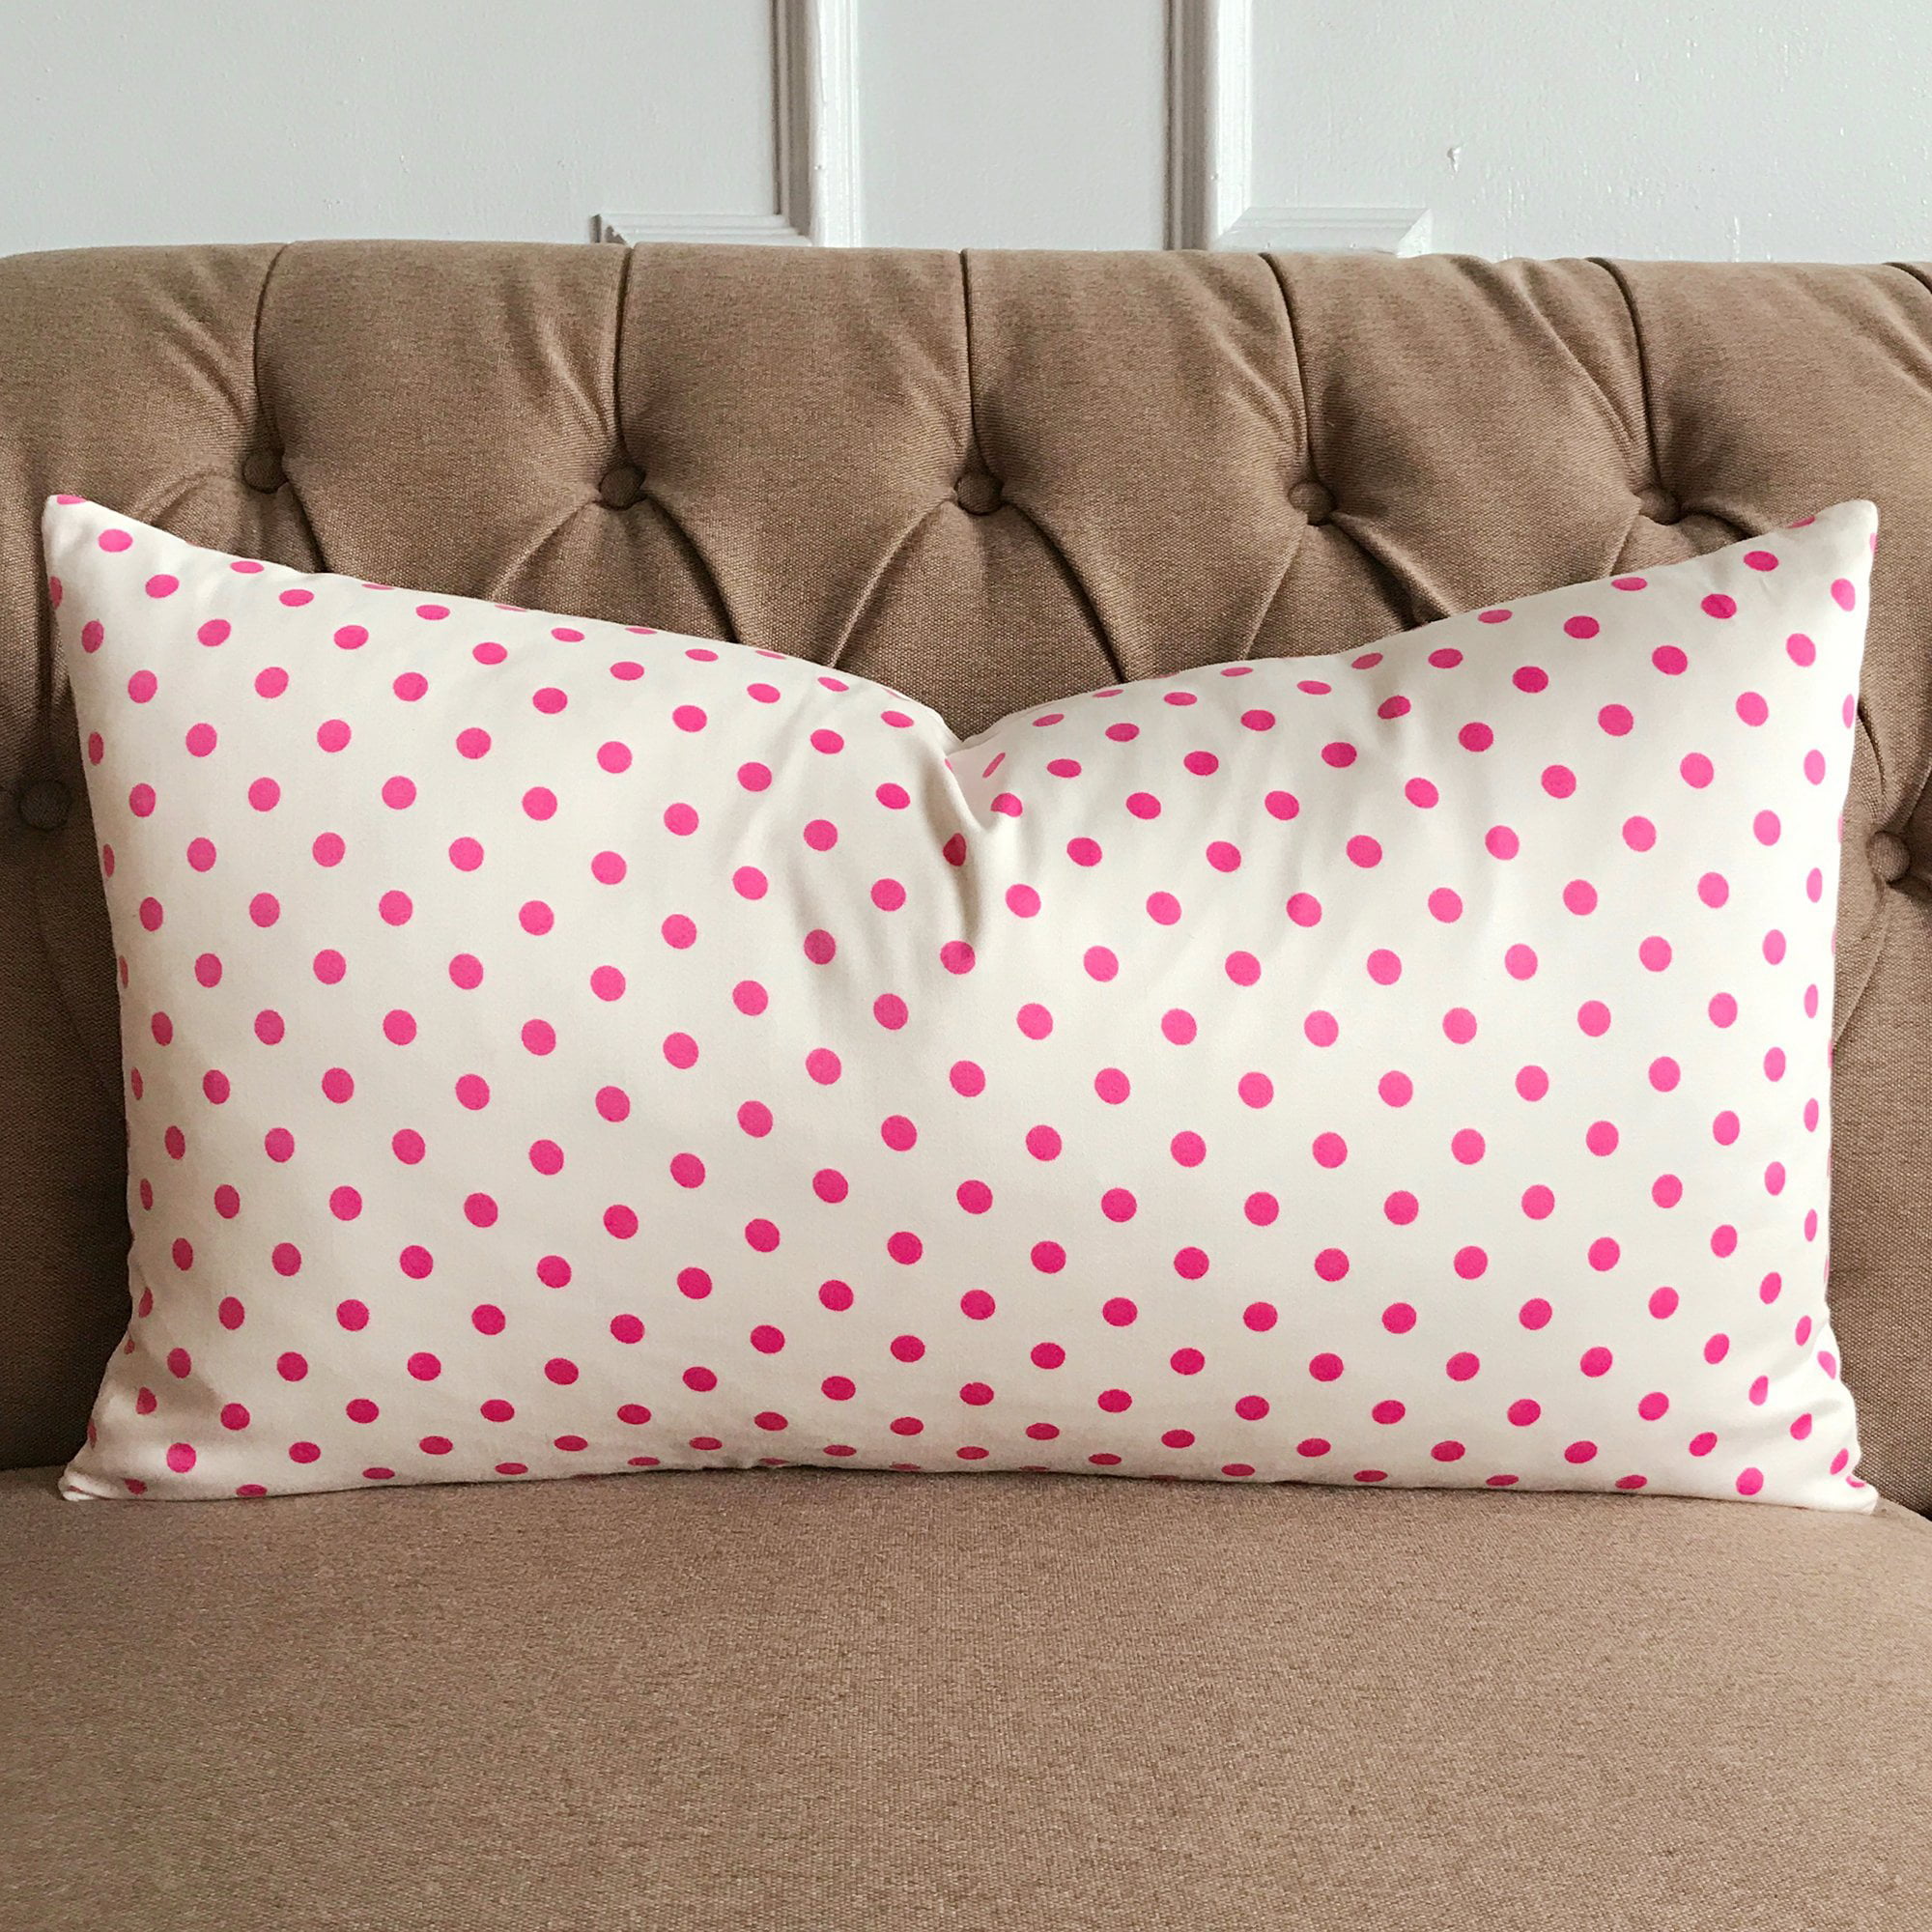 Girls Pink and White Polka Dot Decorative Pillow Cover 15x26